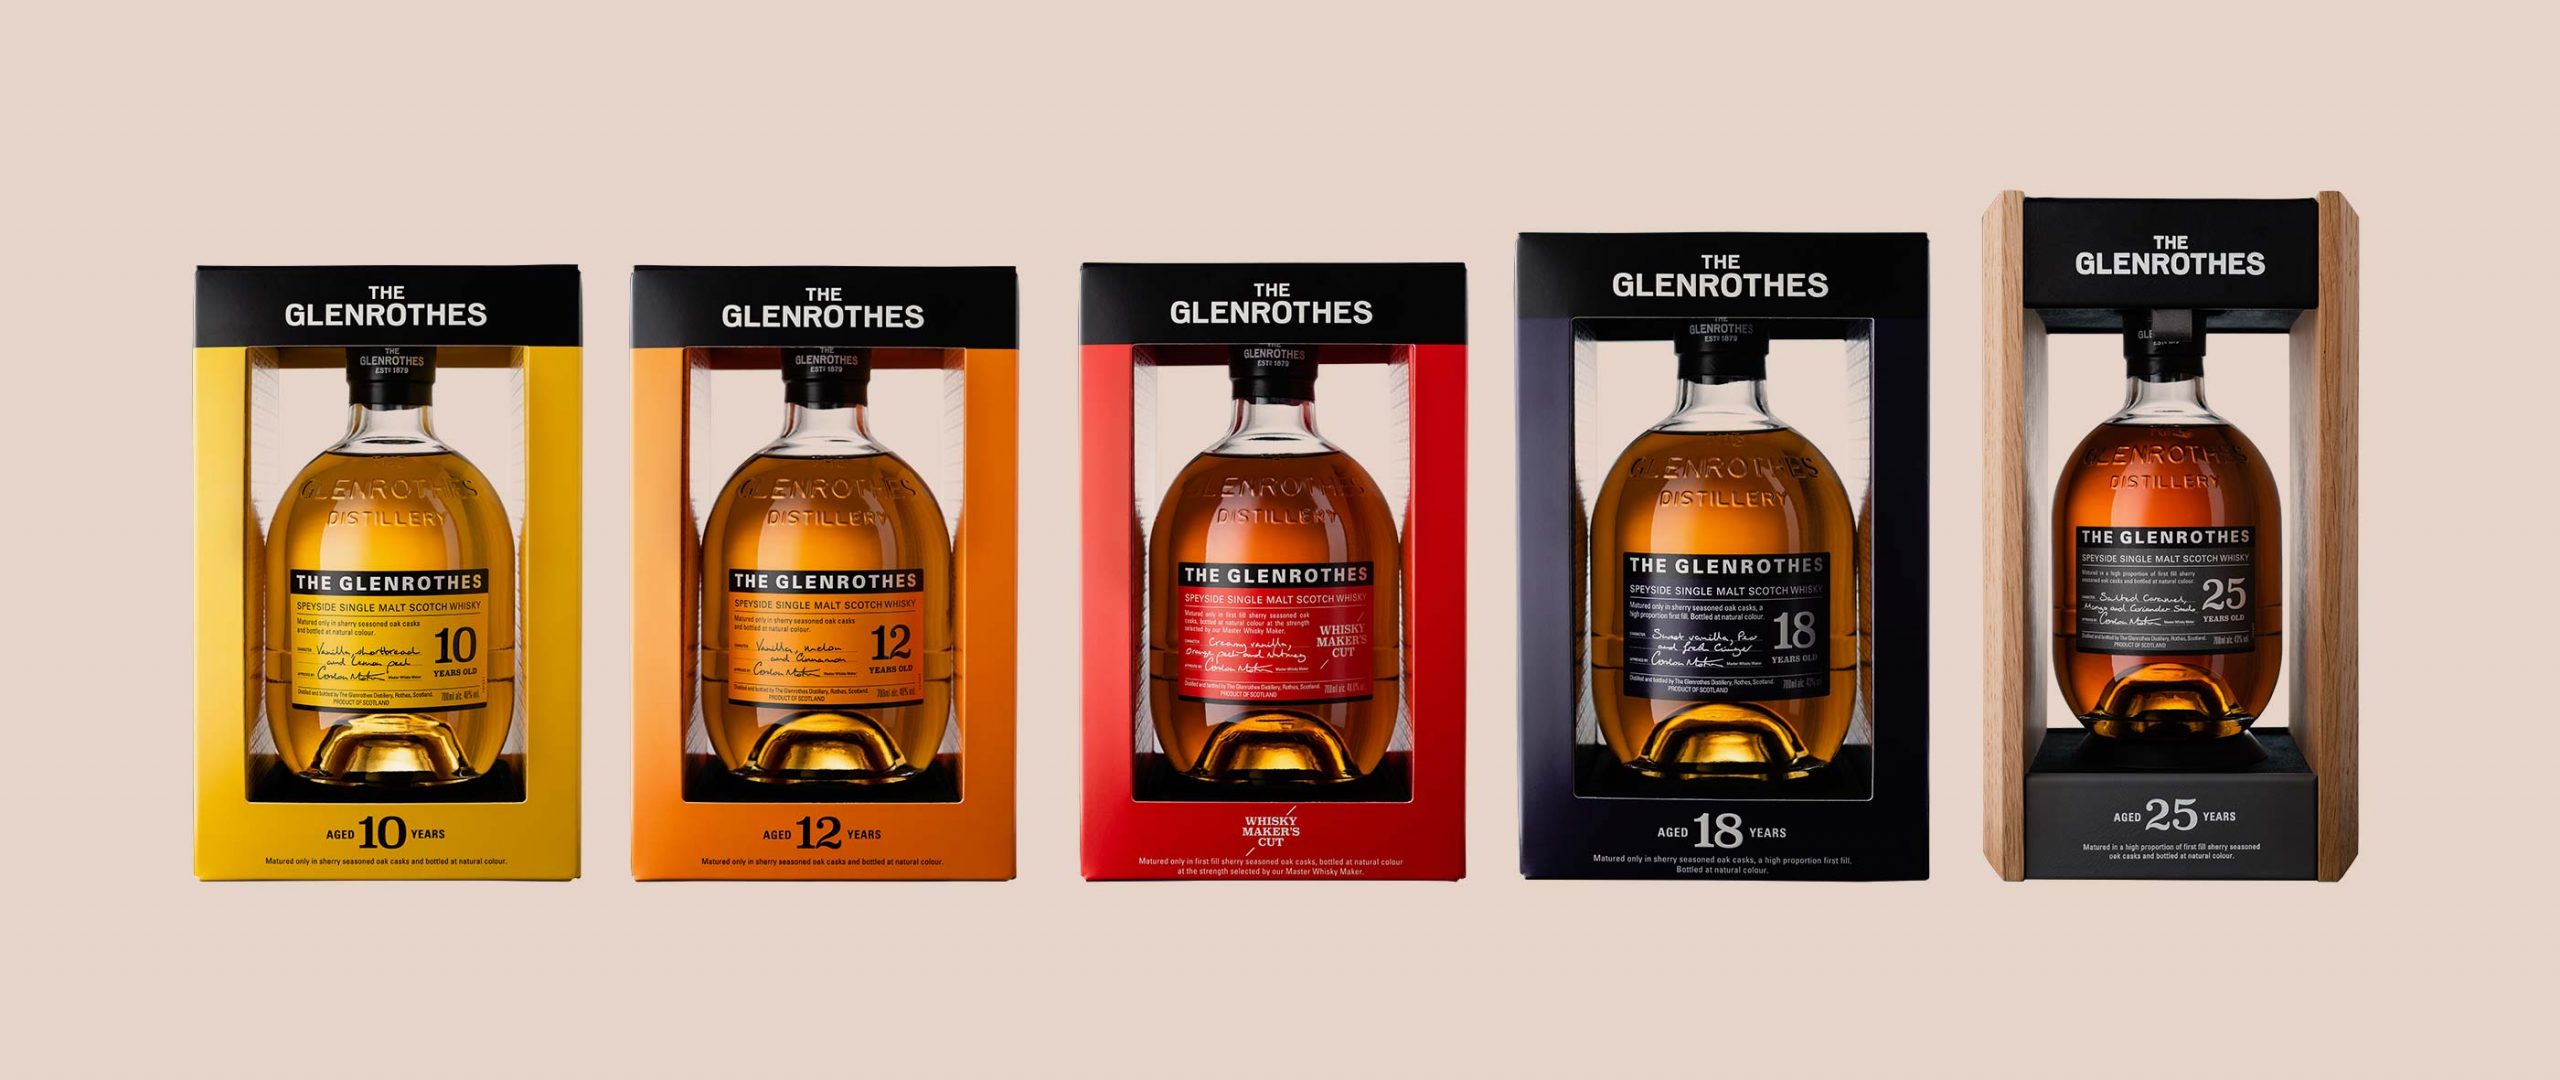 Glenrothes_Packaging